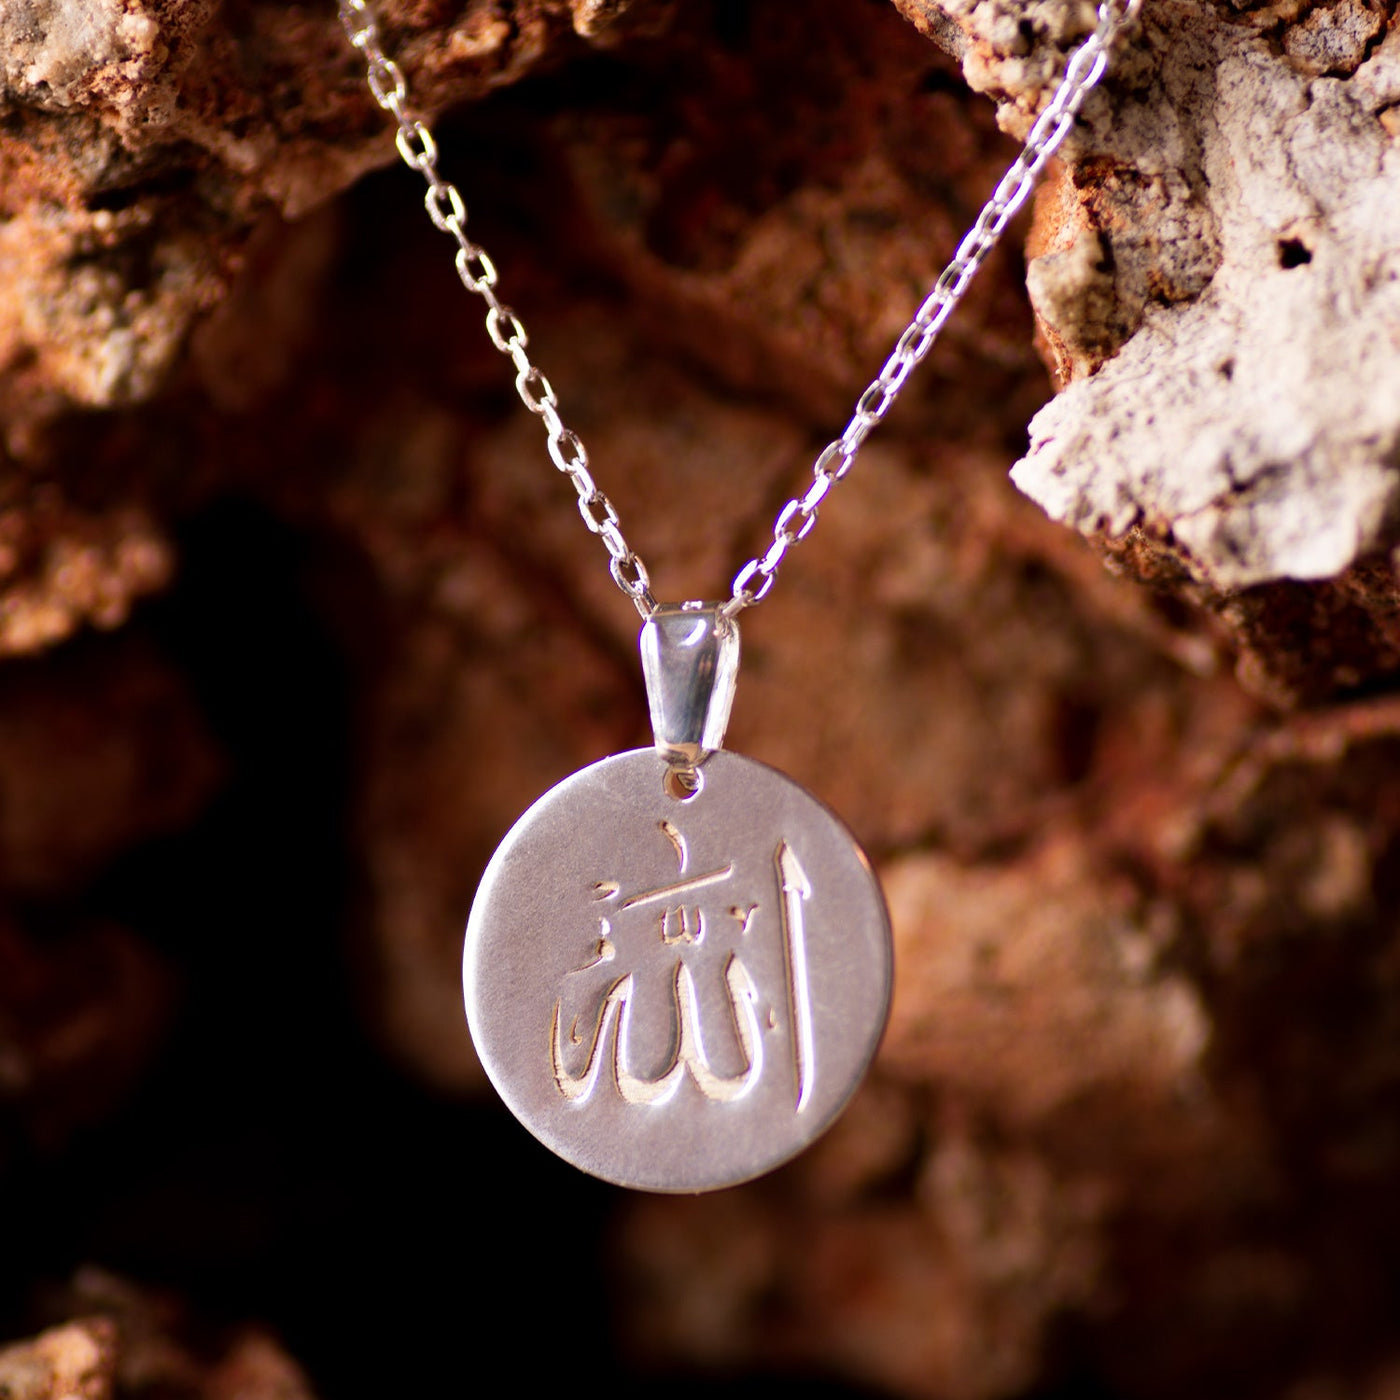 Allah Necklace 925 Sterling Silver - WAMT003